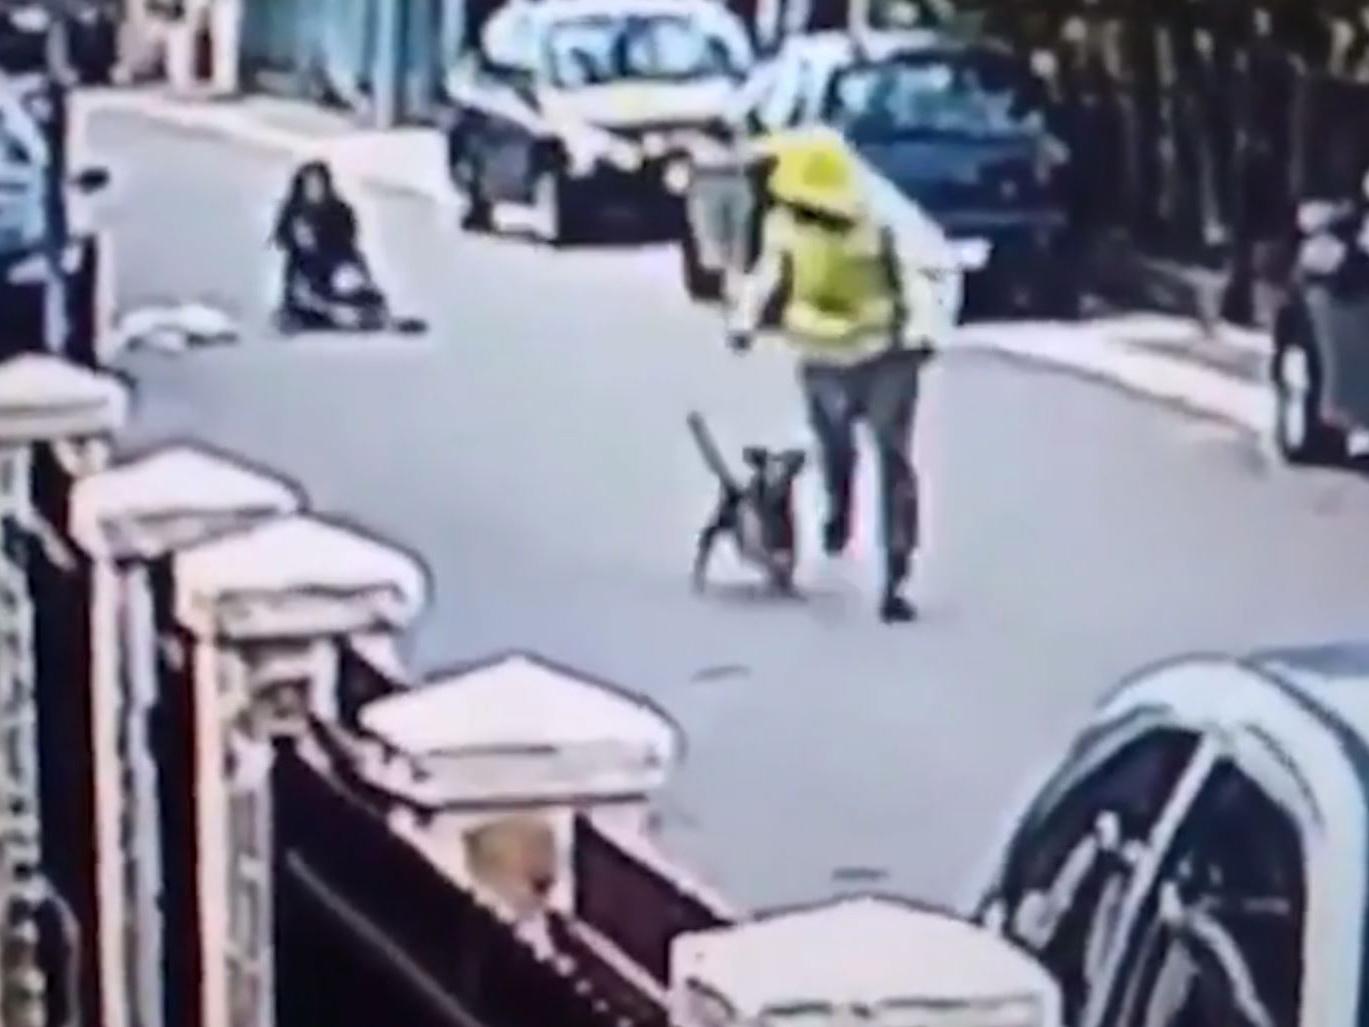 The apparent mugger flees as the heroic dog gives chase